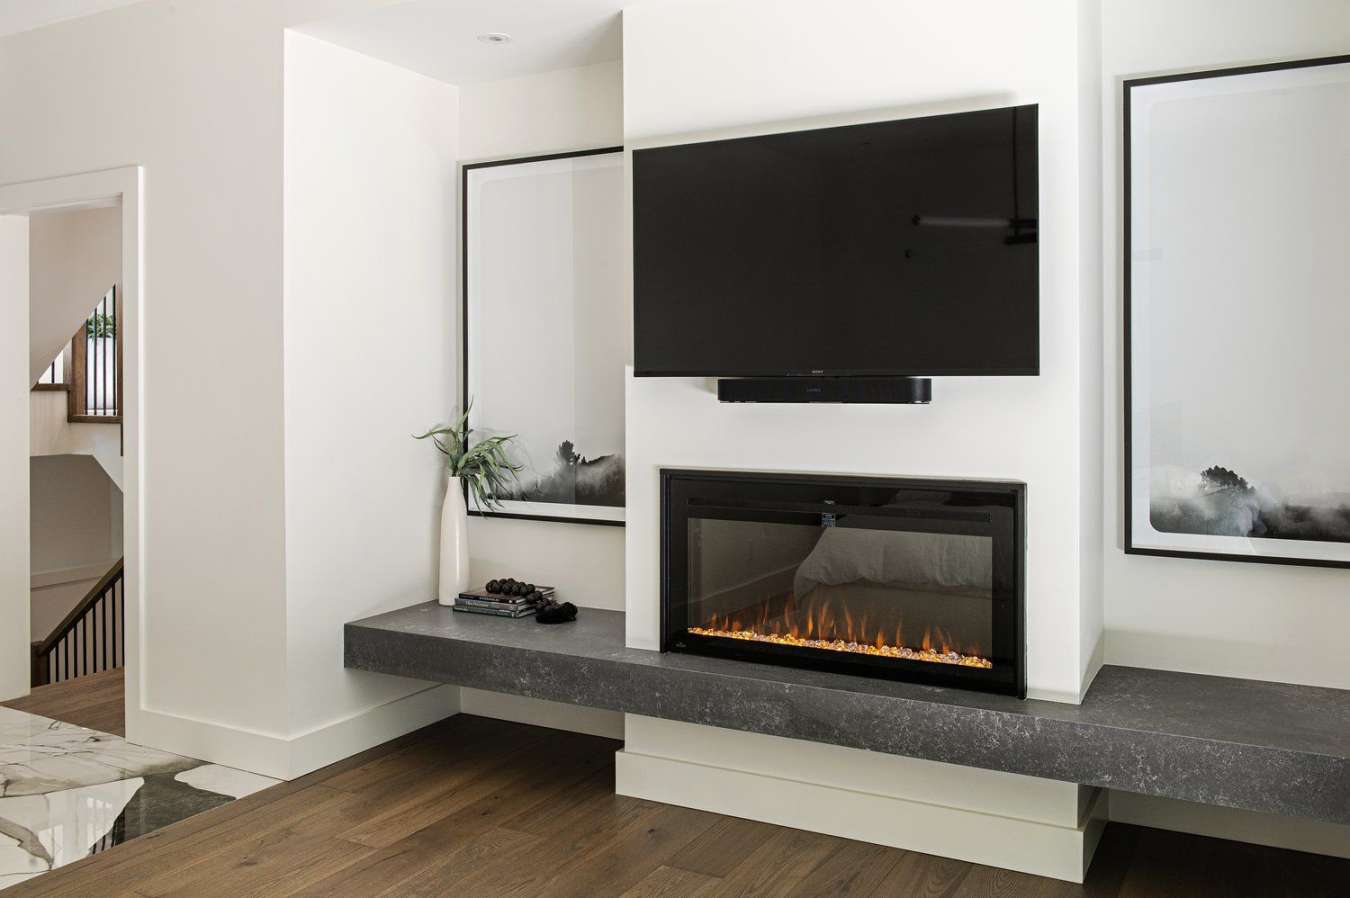 Sleek Electric Fireplace Ideas With a TV Above